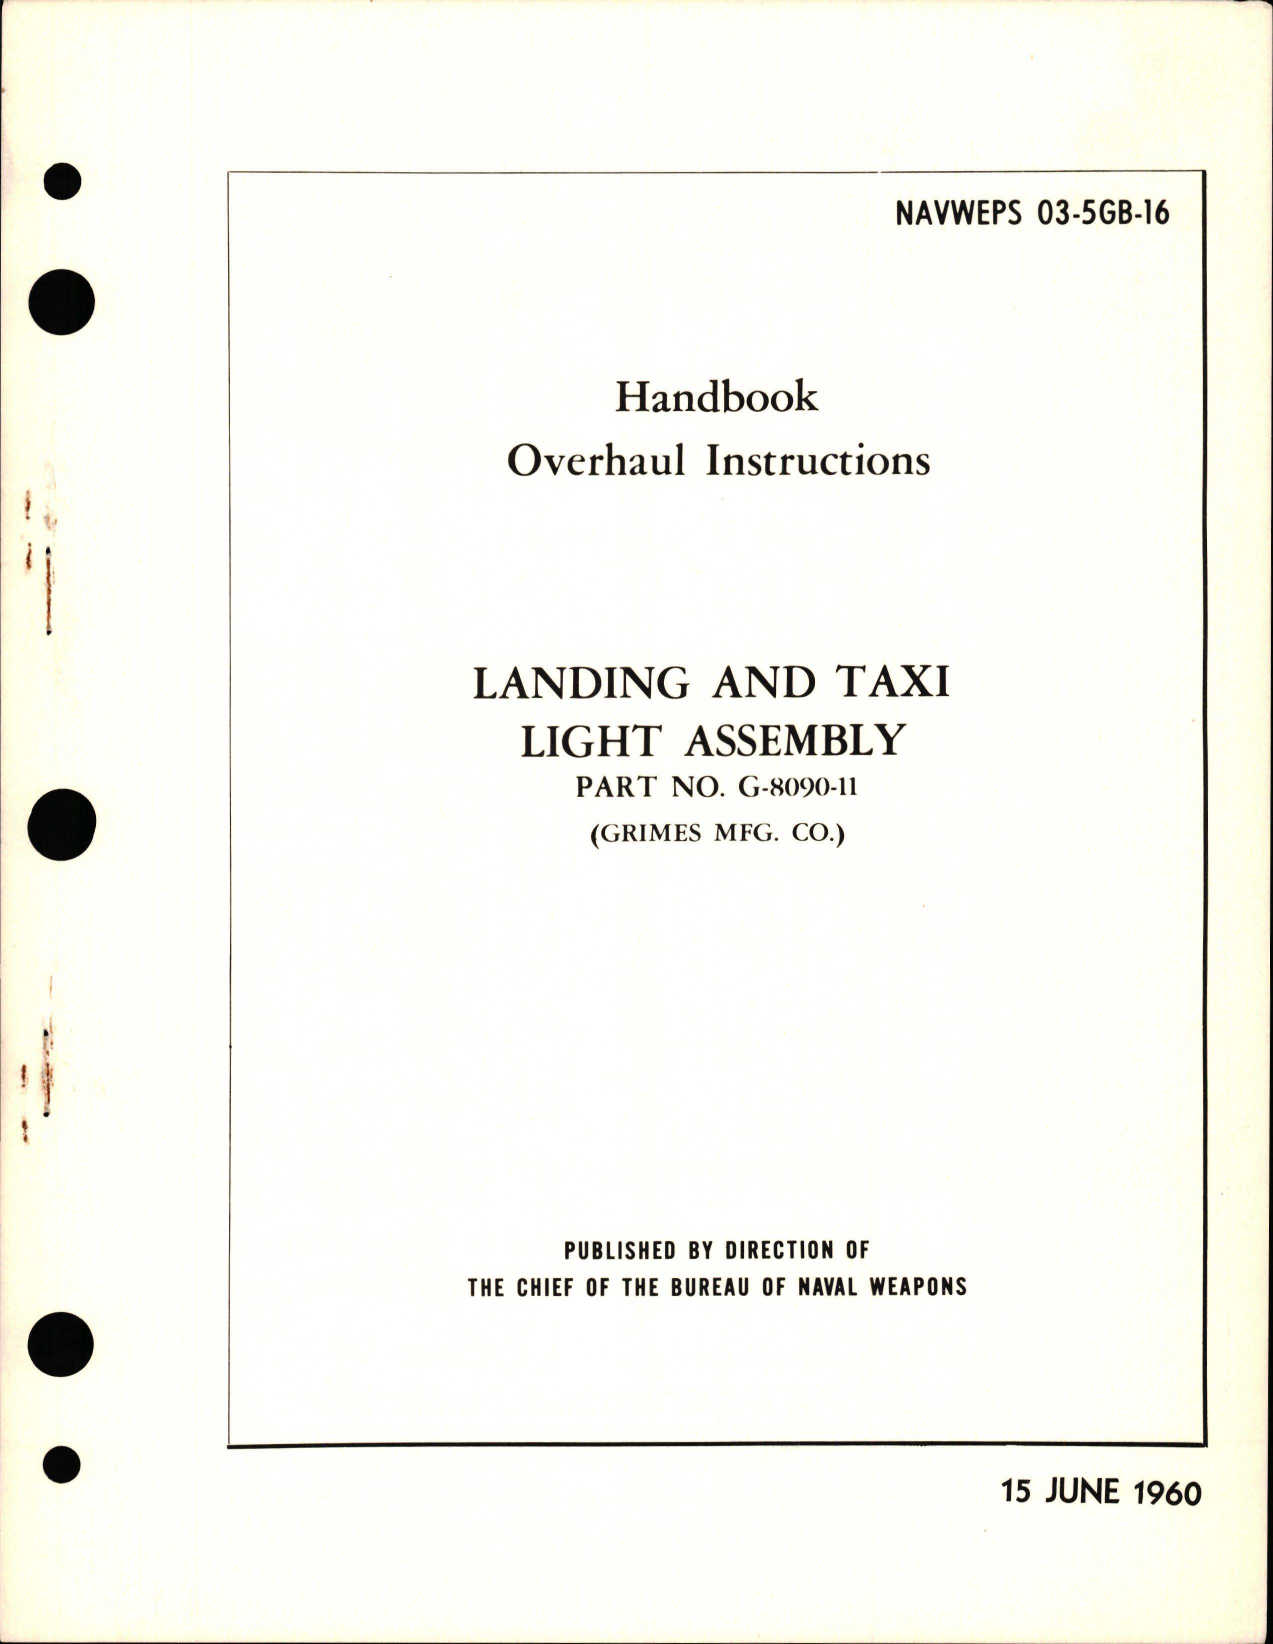 Sample page 1 from AirCorps Library document: Overhaul Instructions for Landing and Taxi Light Assembly - Part G-8090-11 